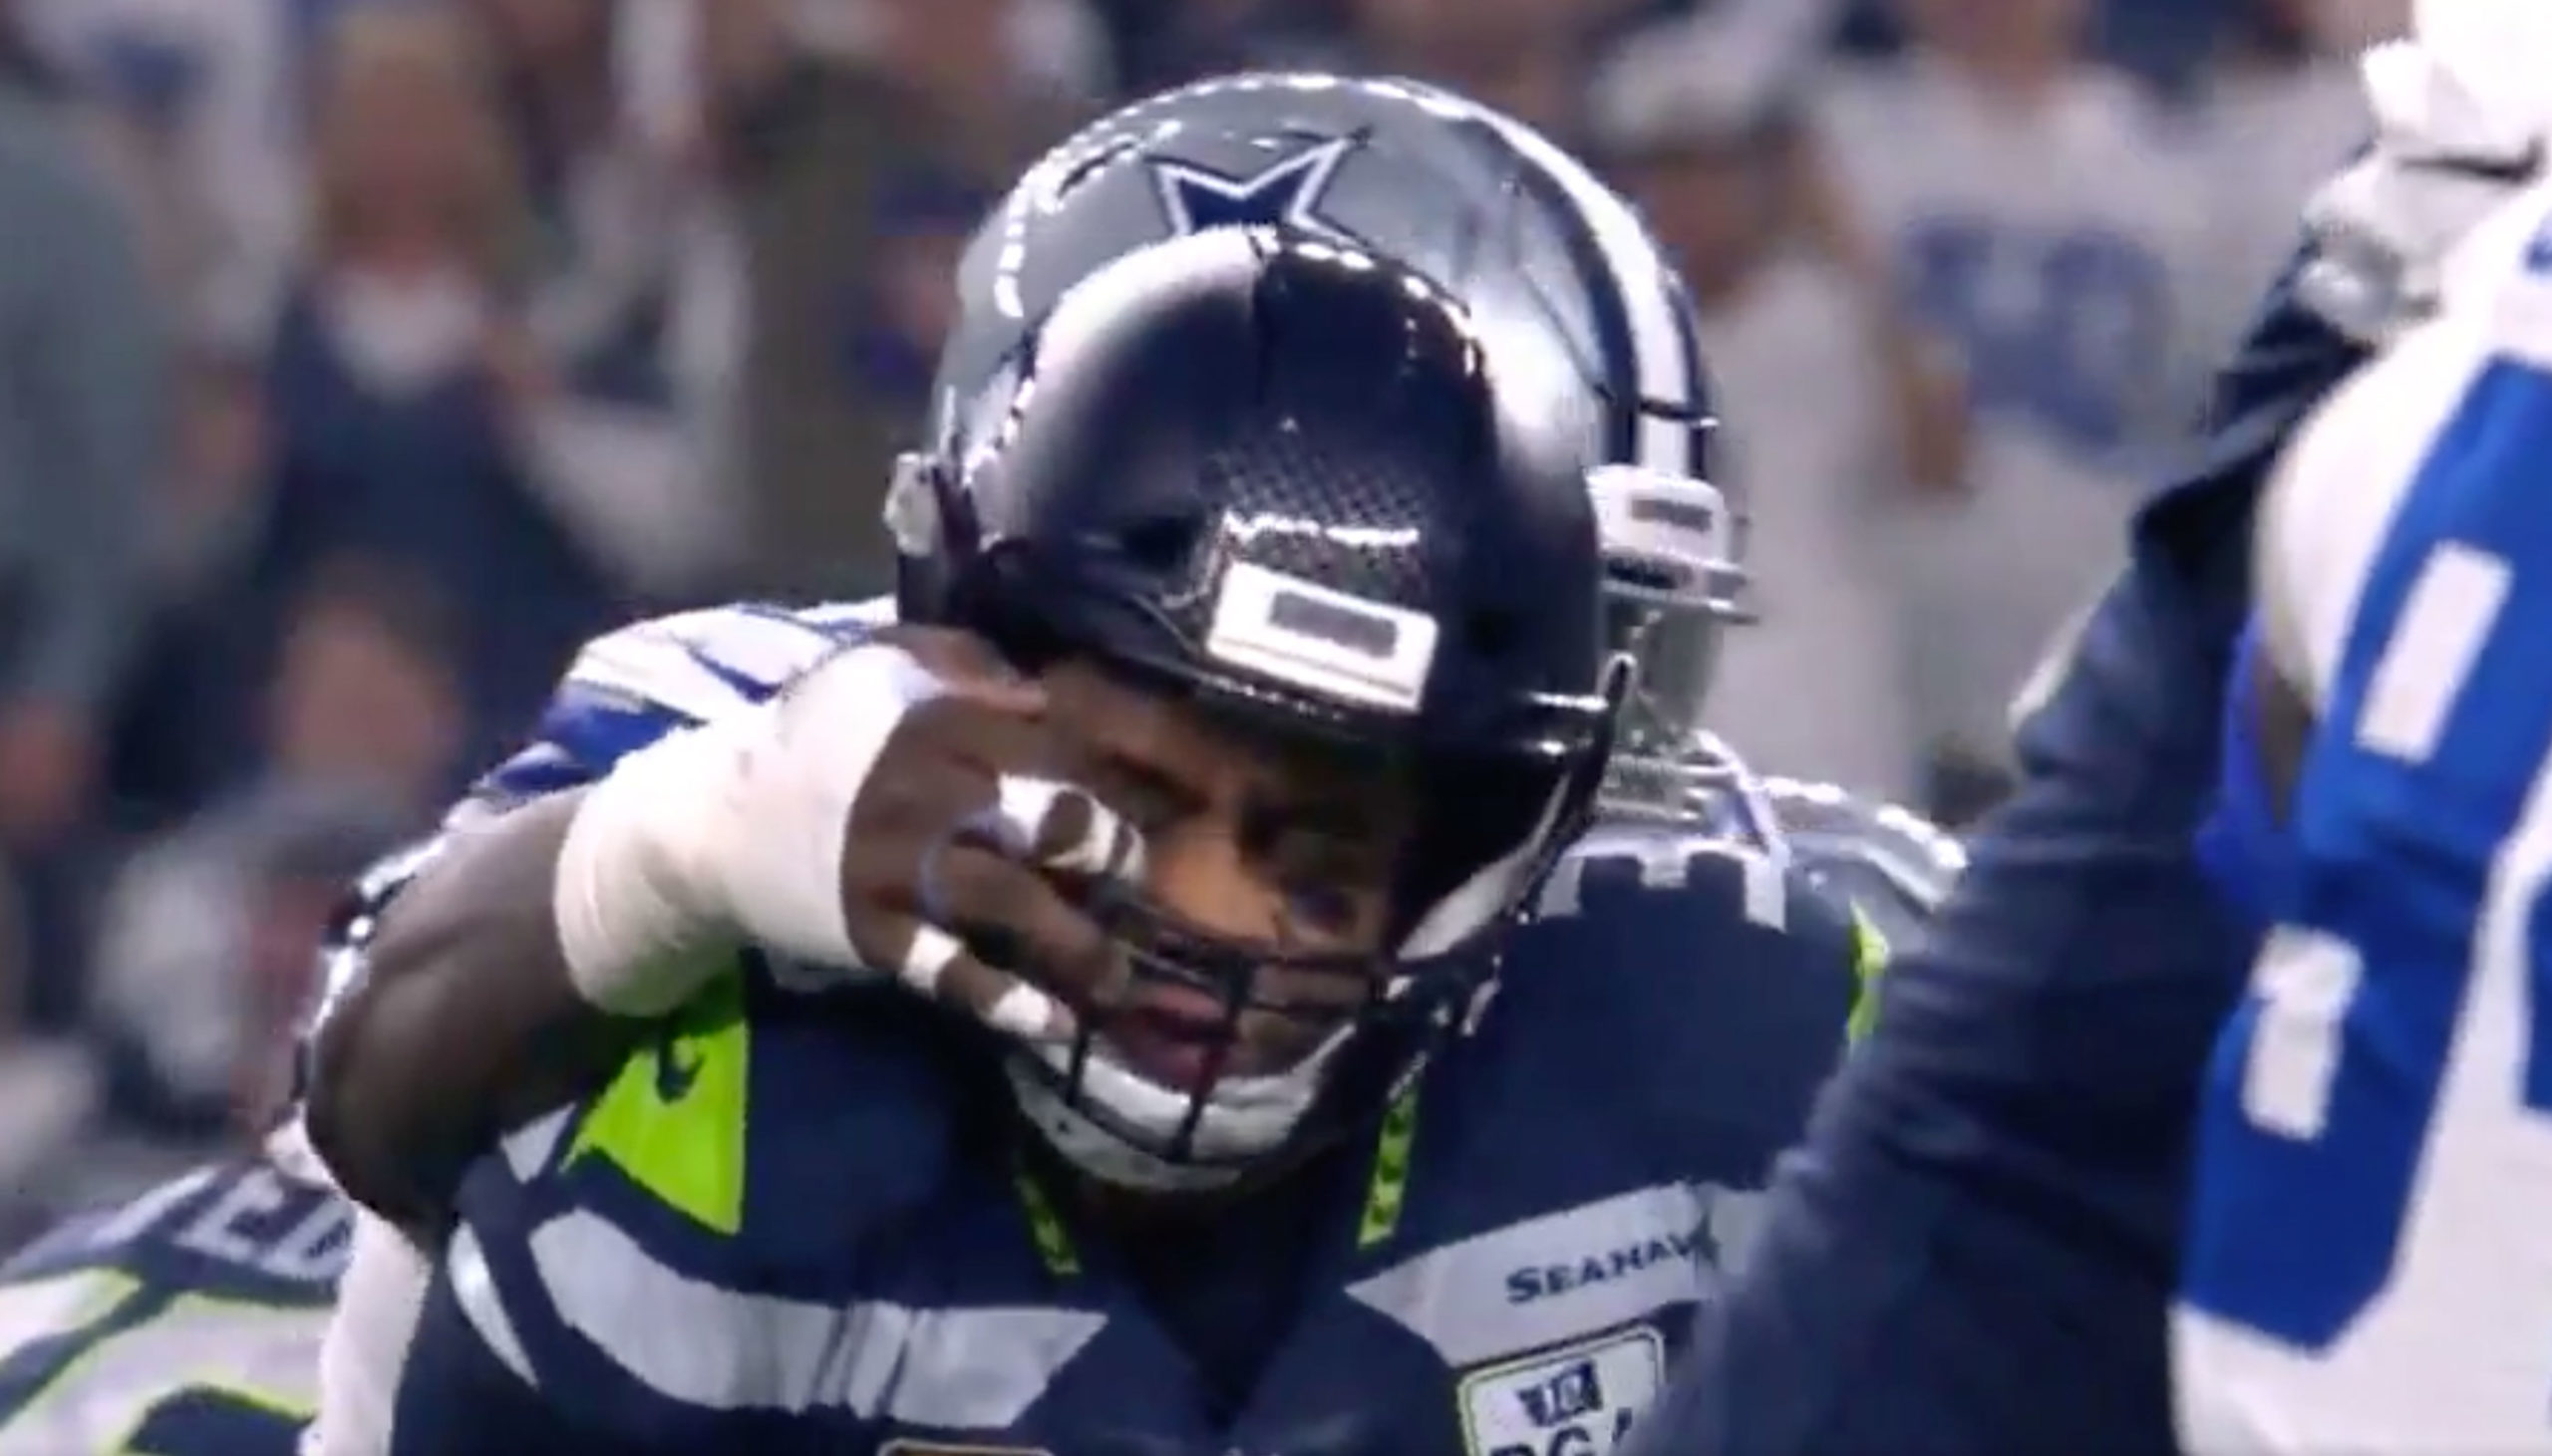 Refs Don't Throw Flag For Blatant Facemask Penalty On Cowboys During Russell  Wilson Sack (VIDEO)